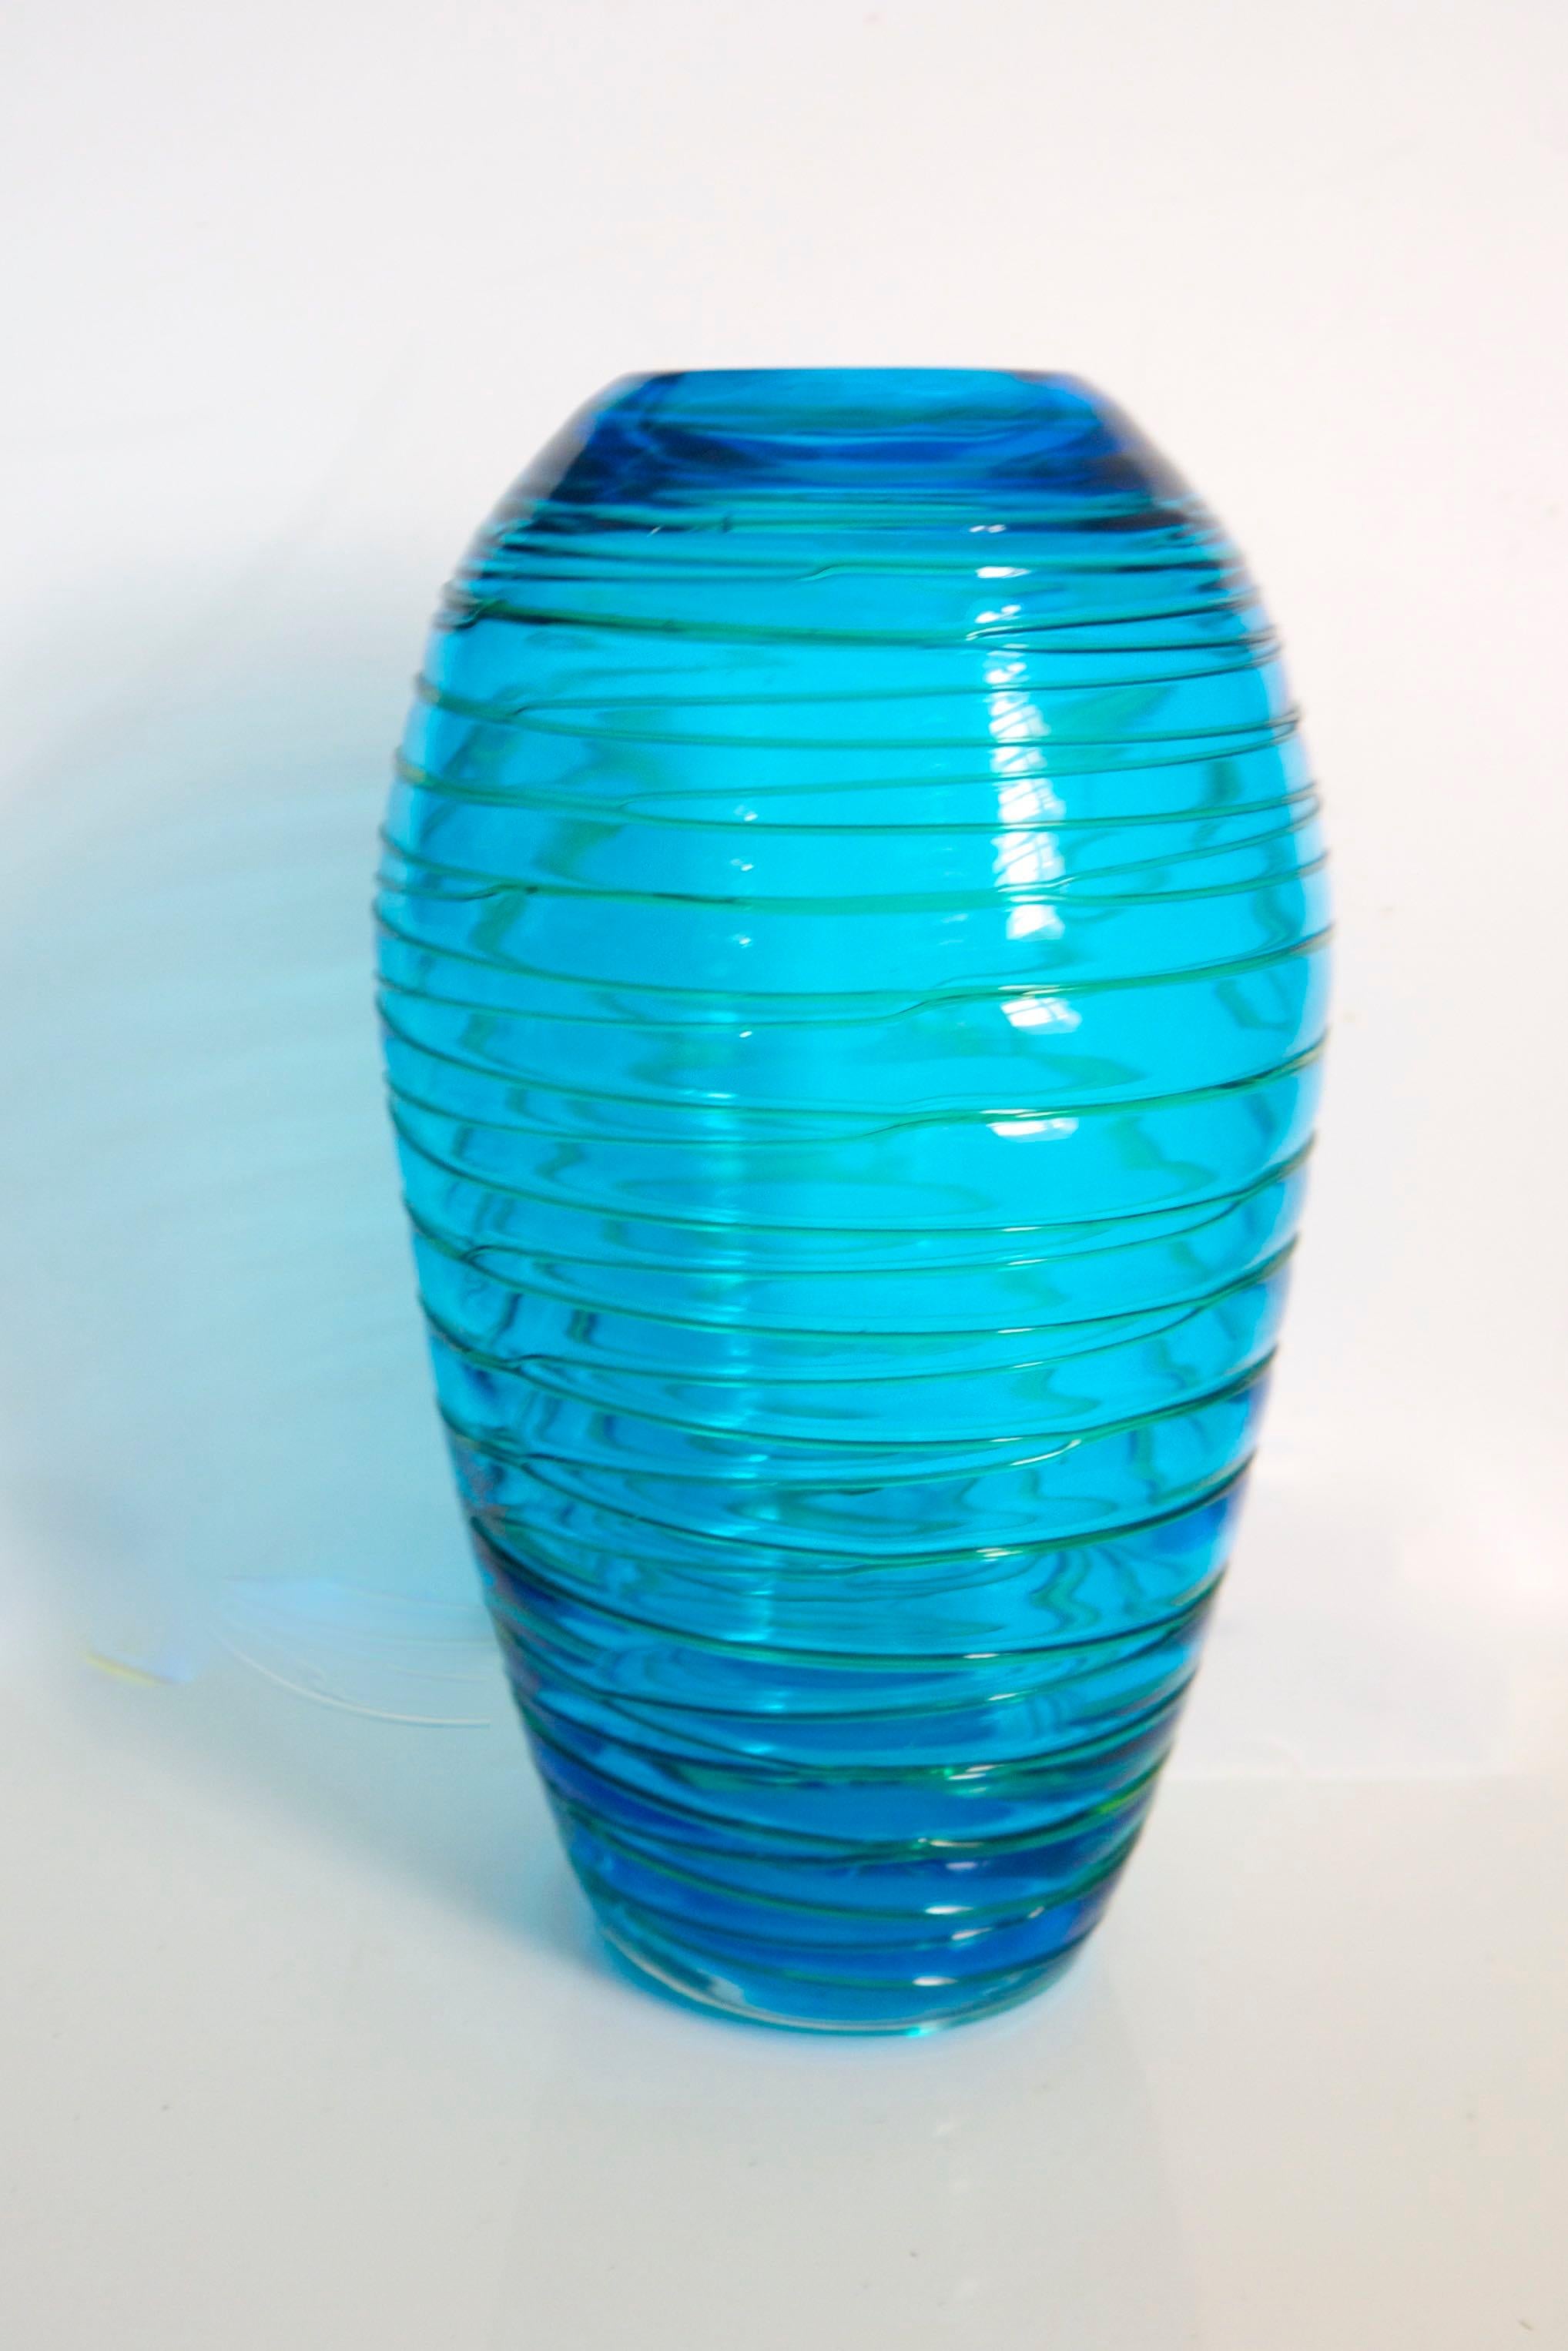 Cobalt blue glass vase with green spiralled glass threads, designed by Fulvio Bianconi (1915-1996) for Venini. Originally, this model was produced in different colors, circa 1970, Murano, Italy.

The vase is in excellent condition, with a polished